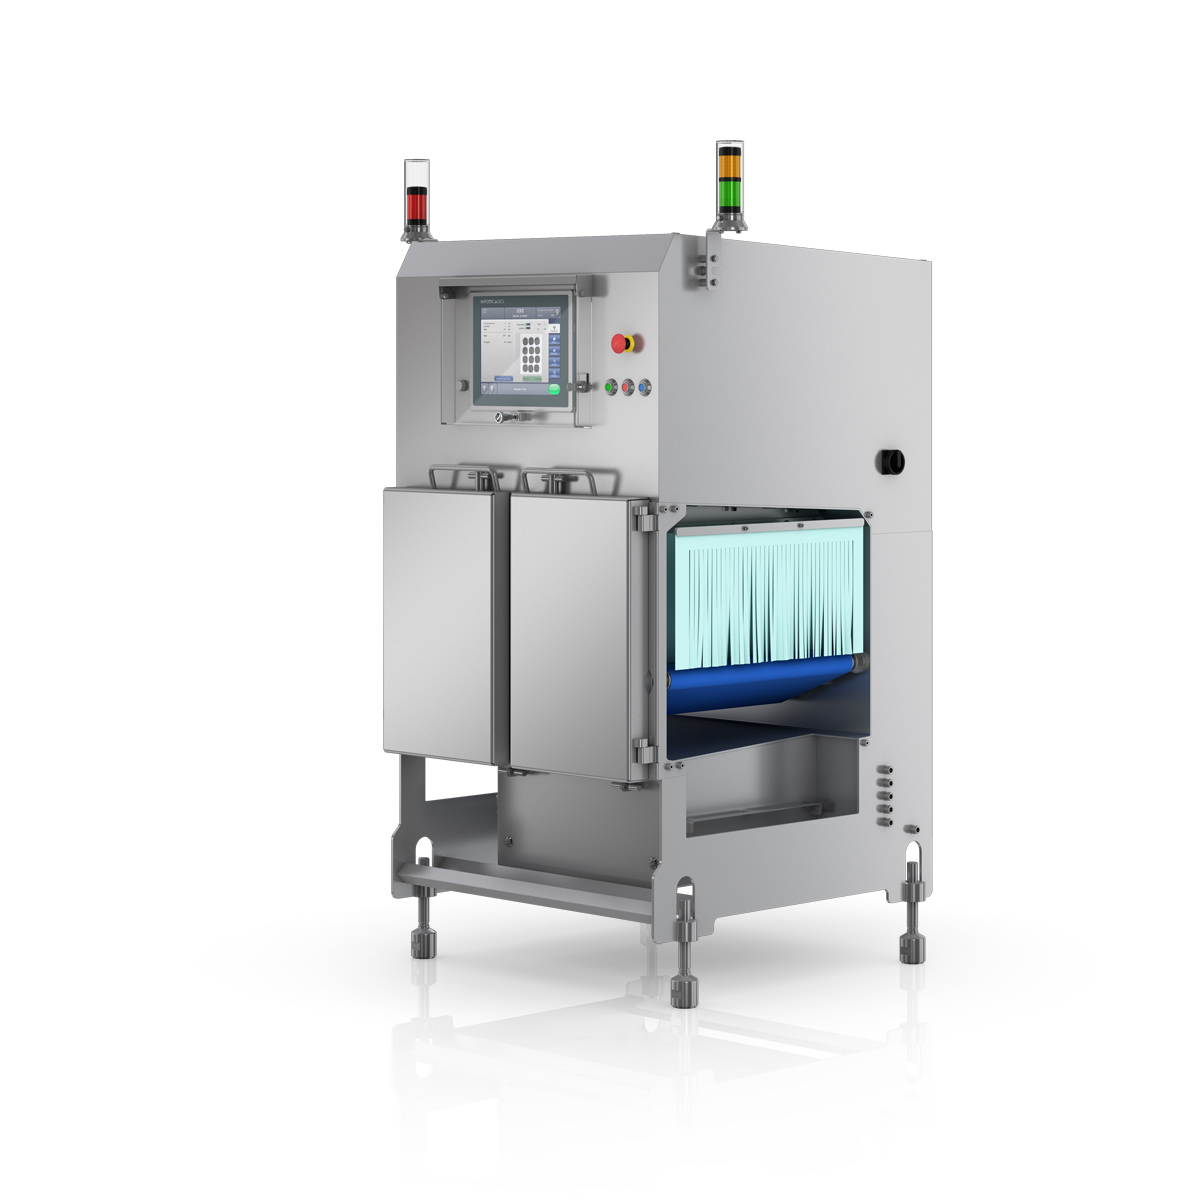 X-ray inspection system checkweigher SC-WD right view